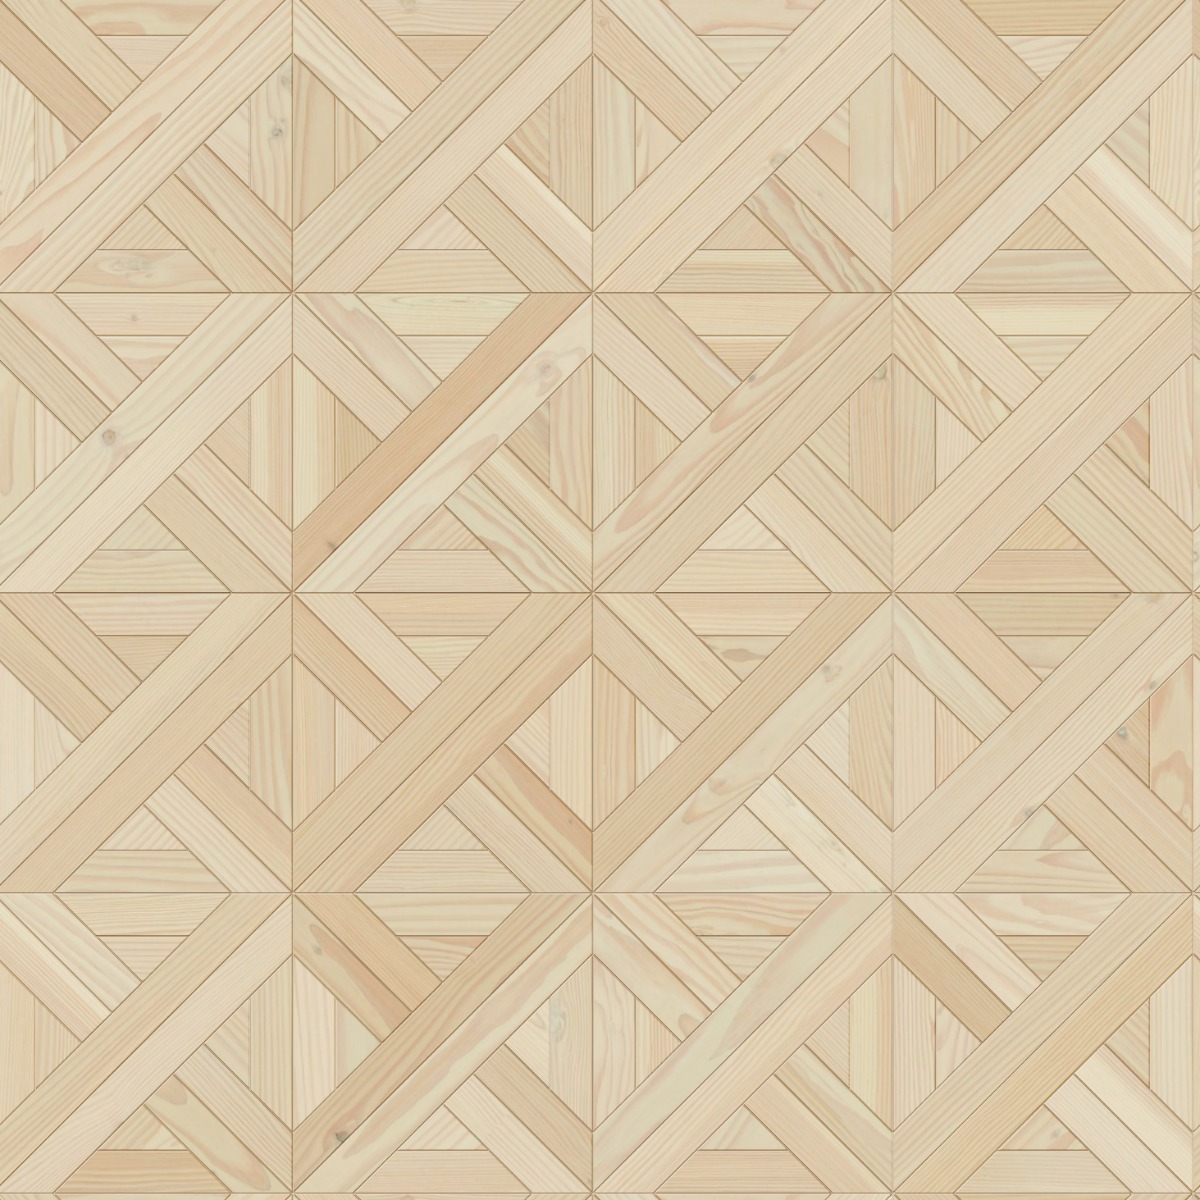 A seamless wood texture with douglas fir boards arranged in a Versailles pattern